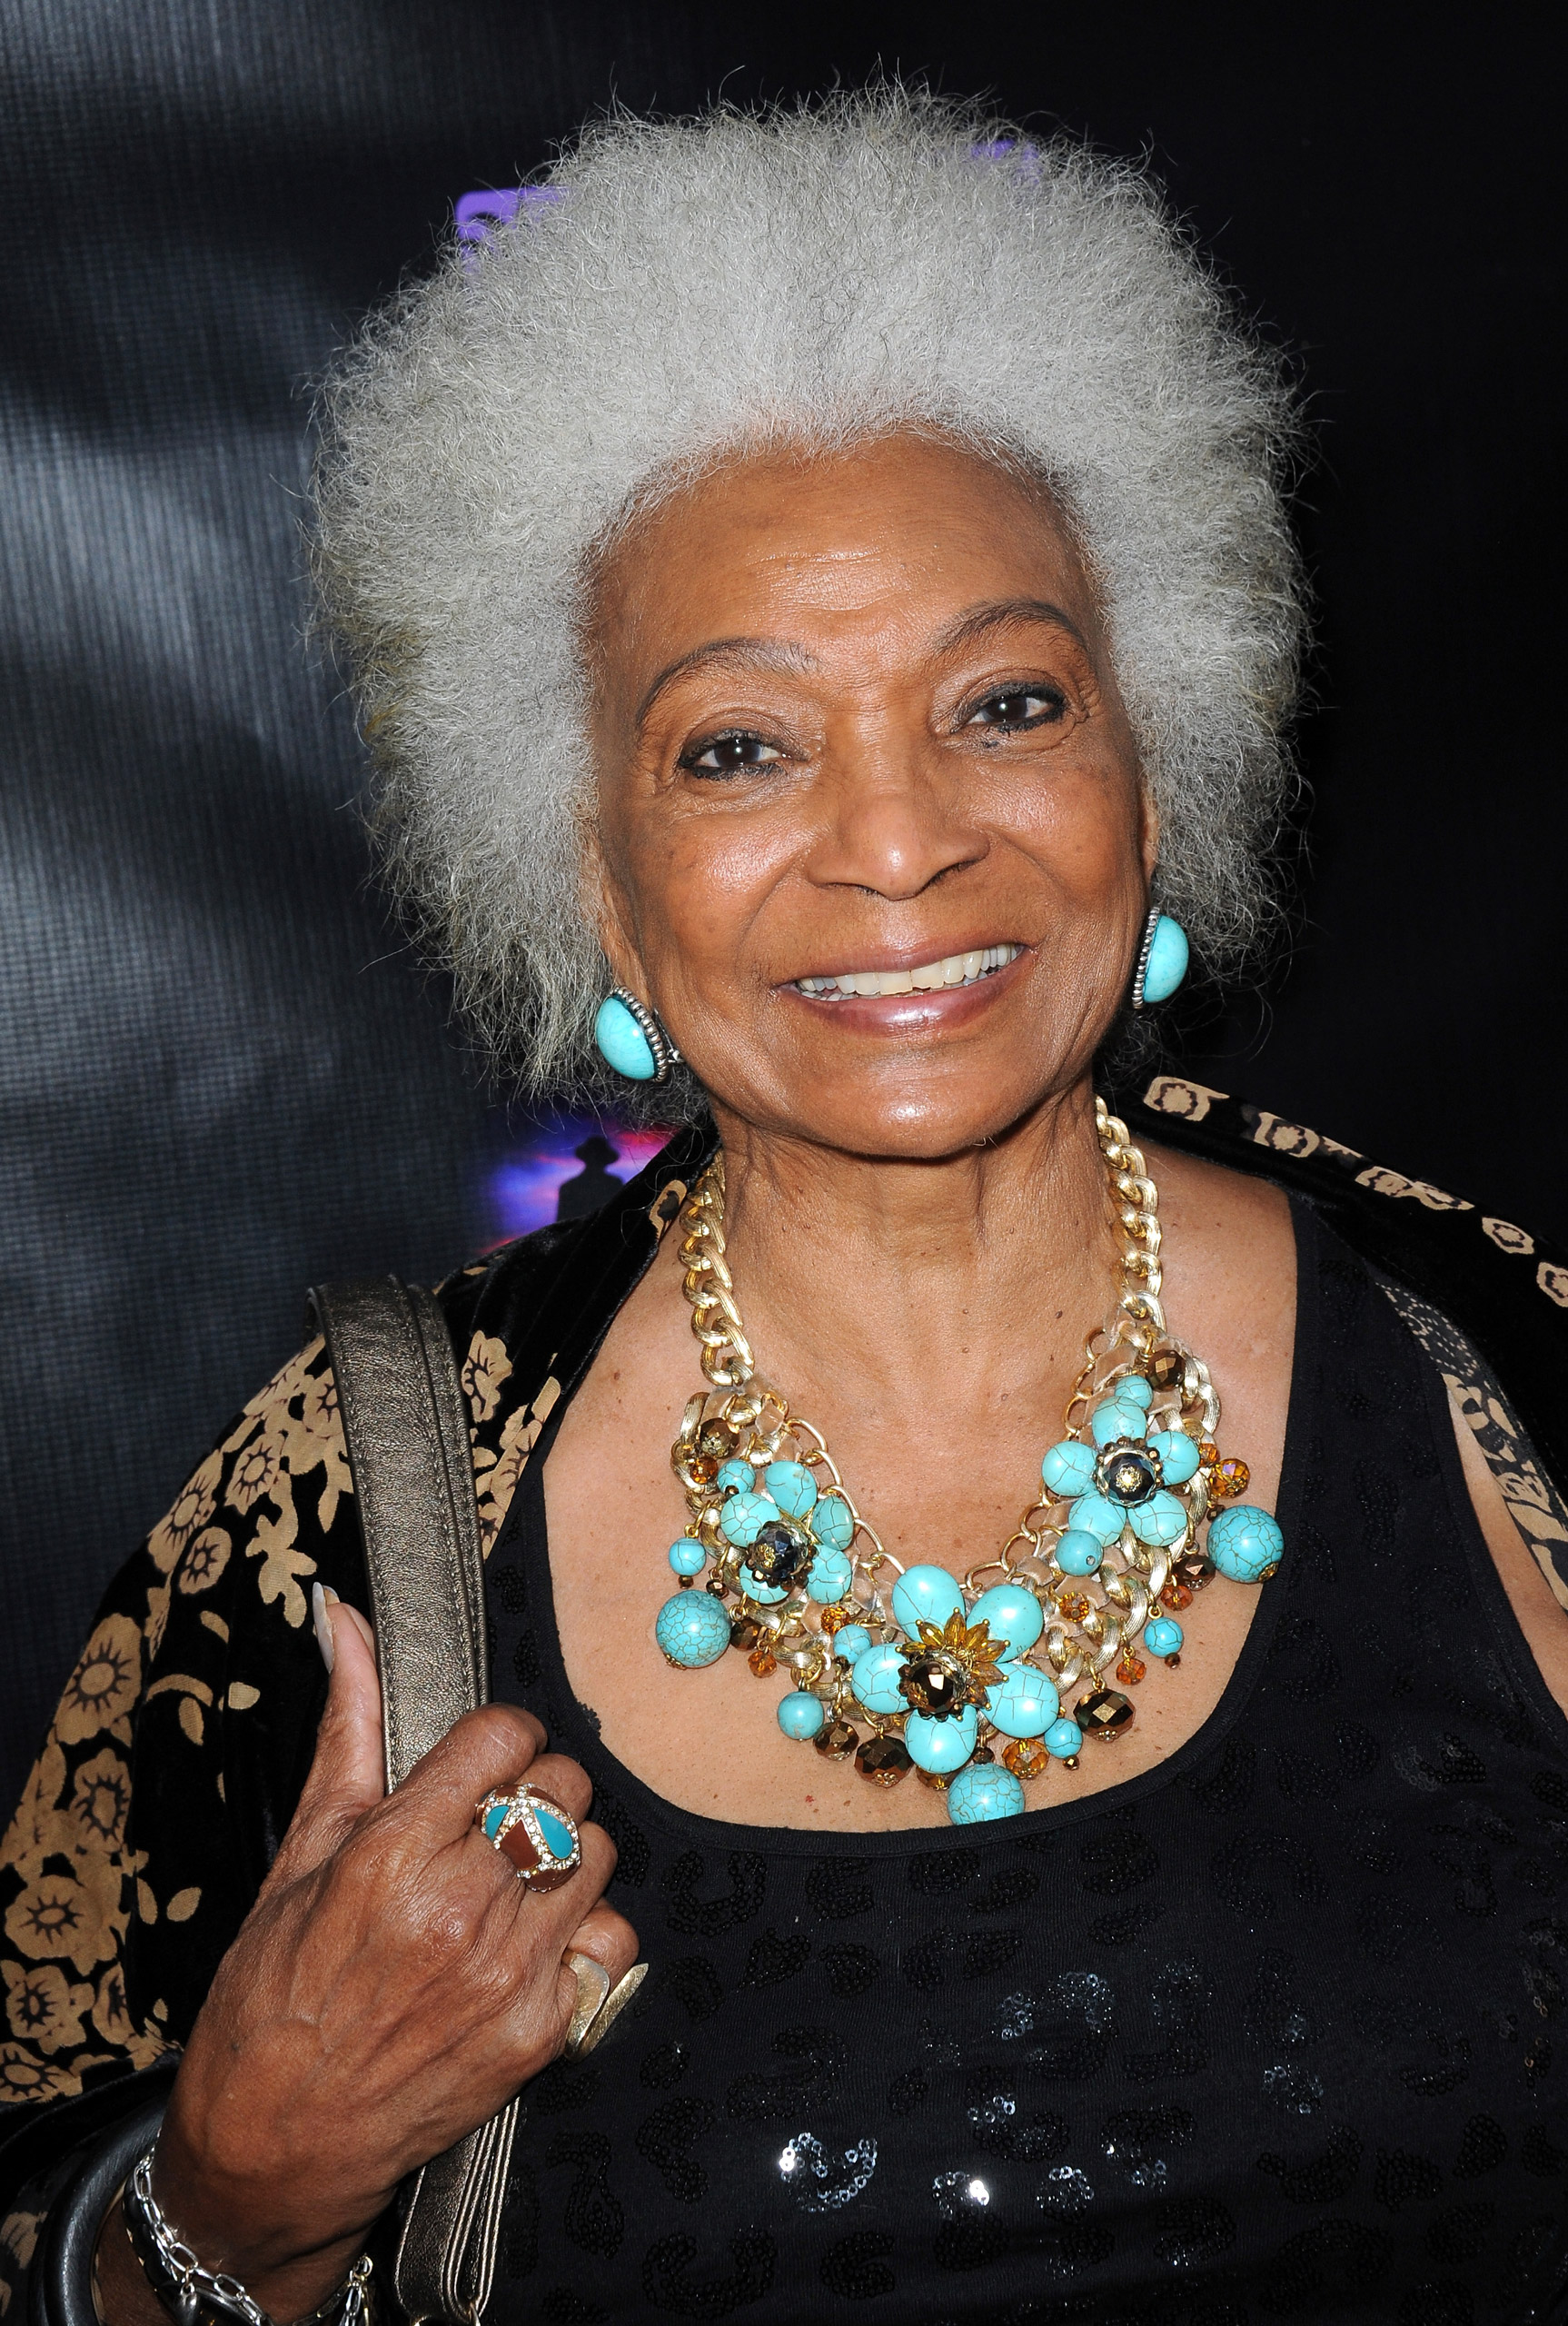 GLENDALE, CA - APRIL 15:  Actress Nichelle Nichols attends the Malcolm McDowell Series Of Q&amp;A Screenings for "Star Trek: Generations" Presented by Prospect House Entertainment moderated by Michael Dorn at The Alex Theater on April 15, 2014 in Glendale, California.  (Photo by Albert L. Ortega/Getty Images)